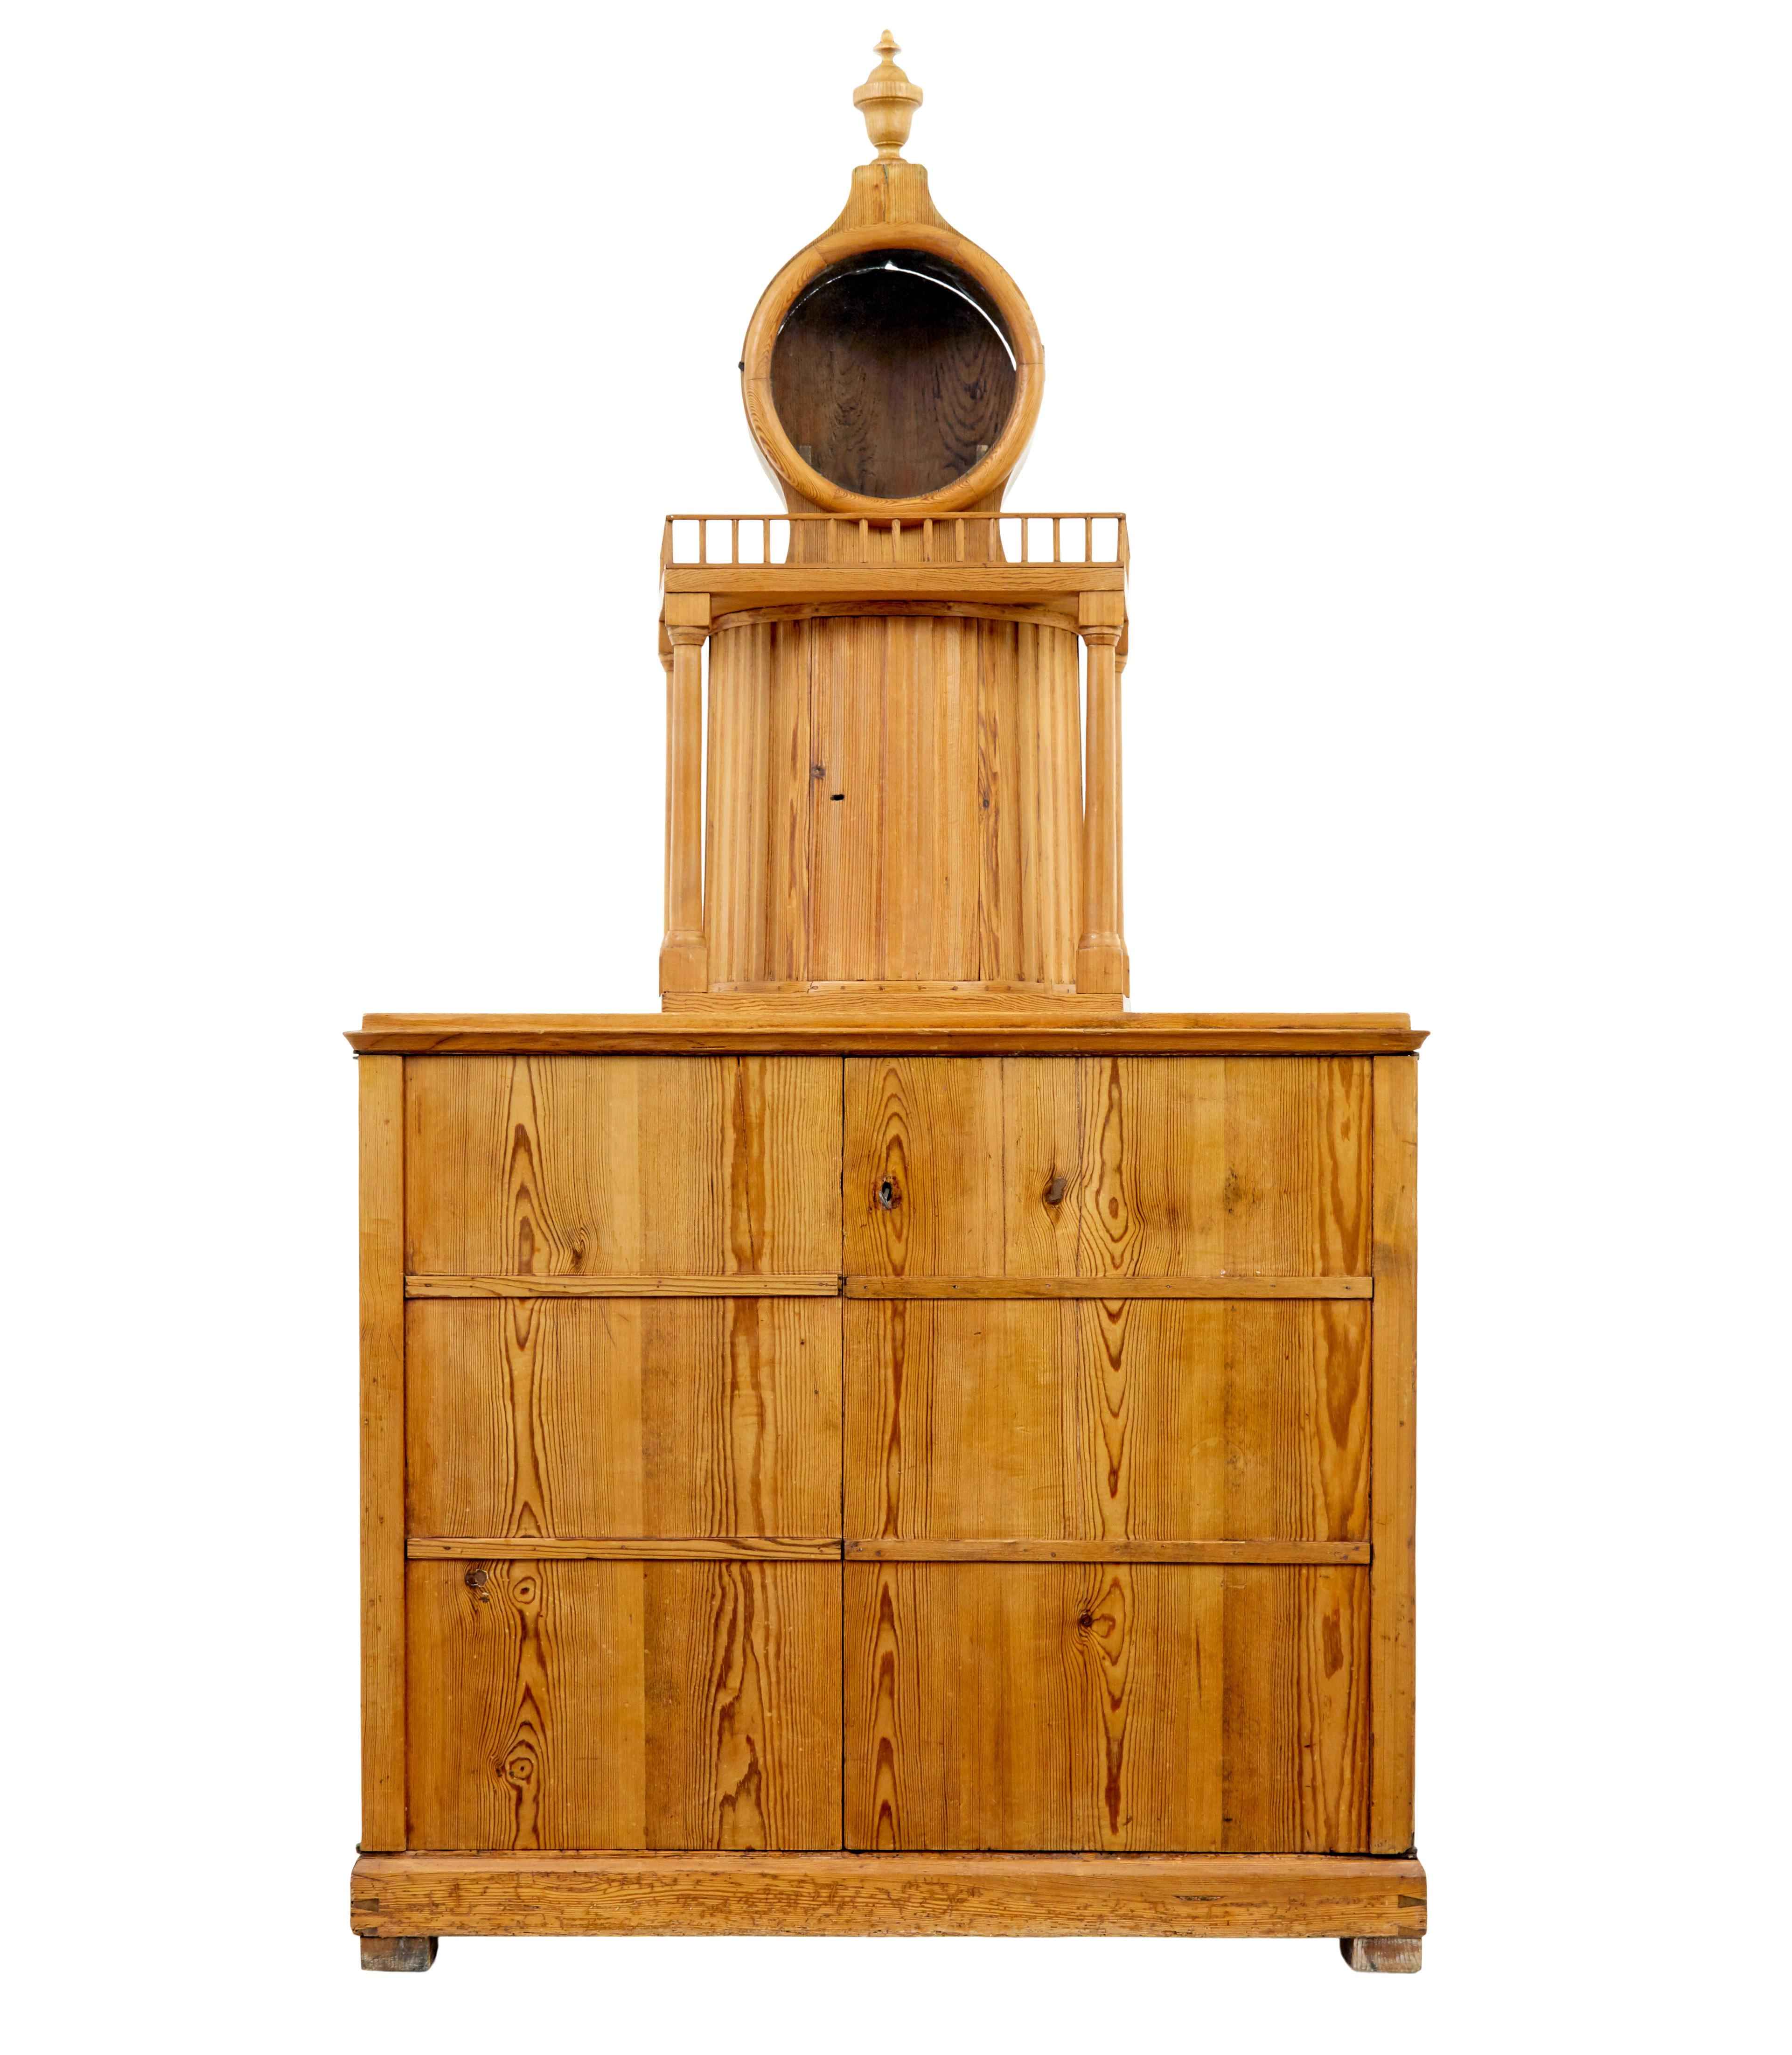 19th century Swedish pine kitchen cupboard circa 1880.

Rare Swedish pine cabinet featuring a clock tower on the top surface.   Clock face mount with removable hood, the chains and weights and pendulum would hang down the central enclosed channel.